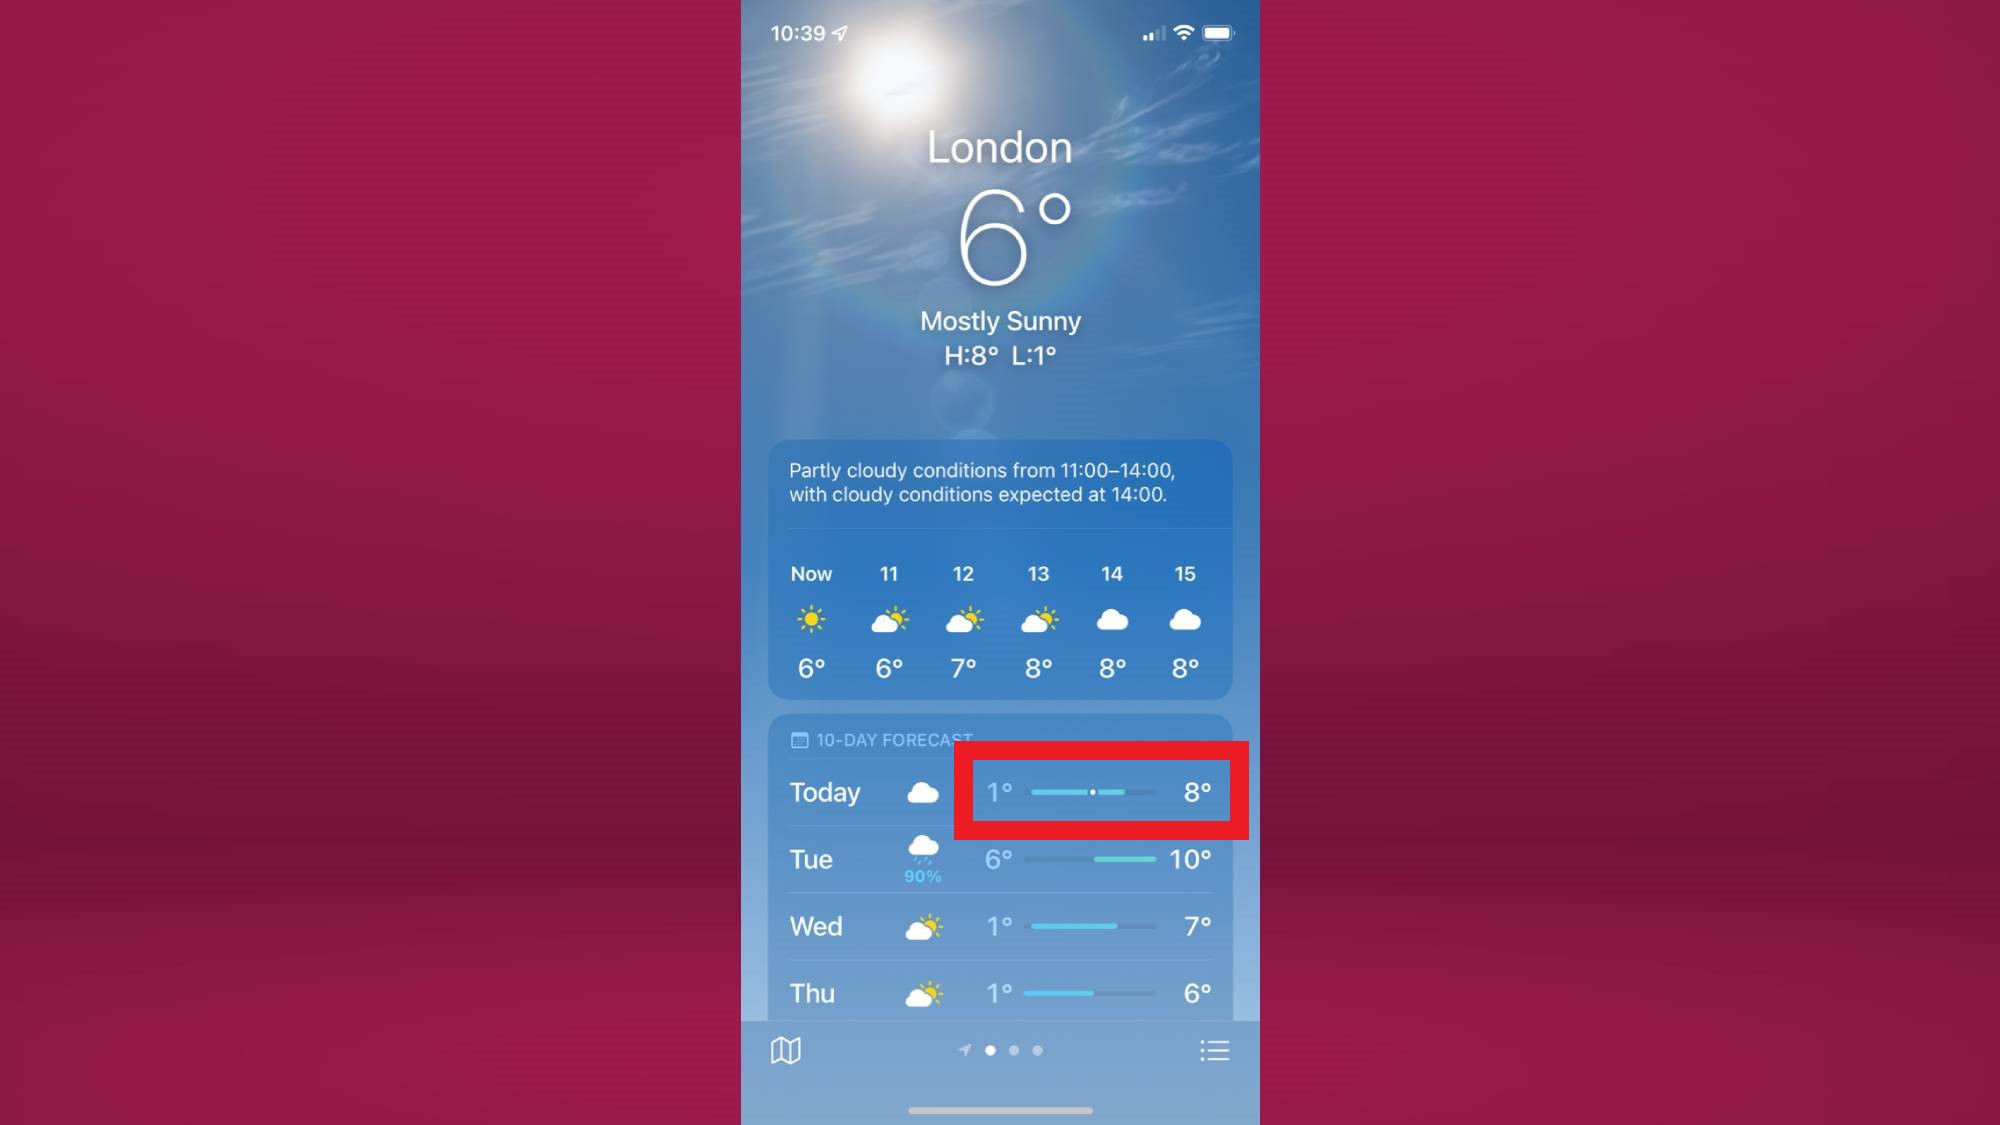 How to access the interactive map on the iPhone weather app